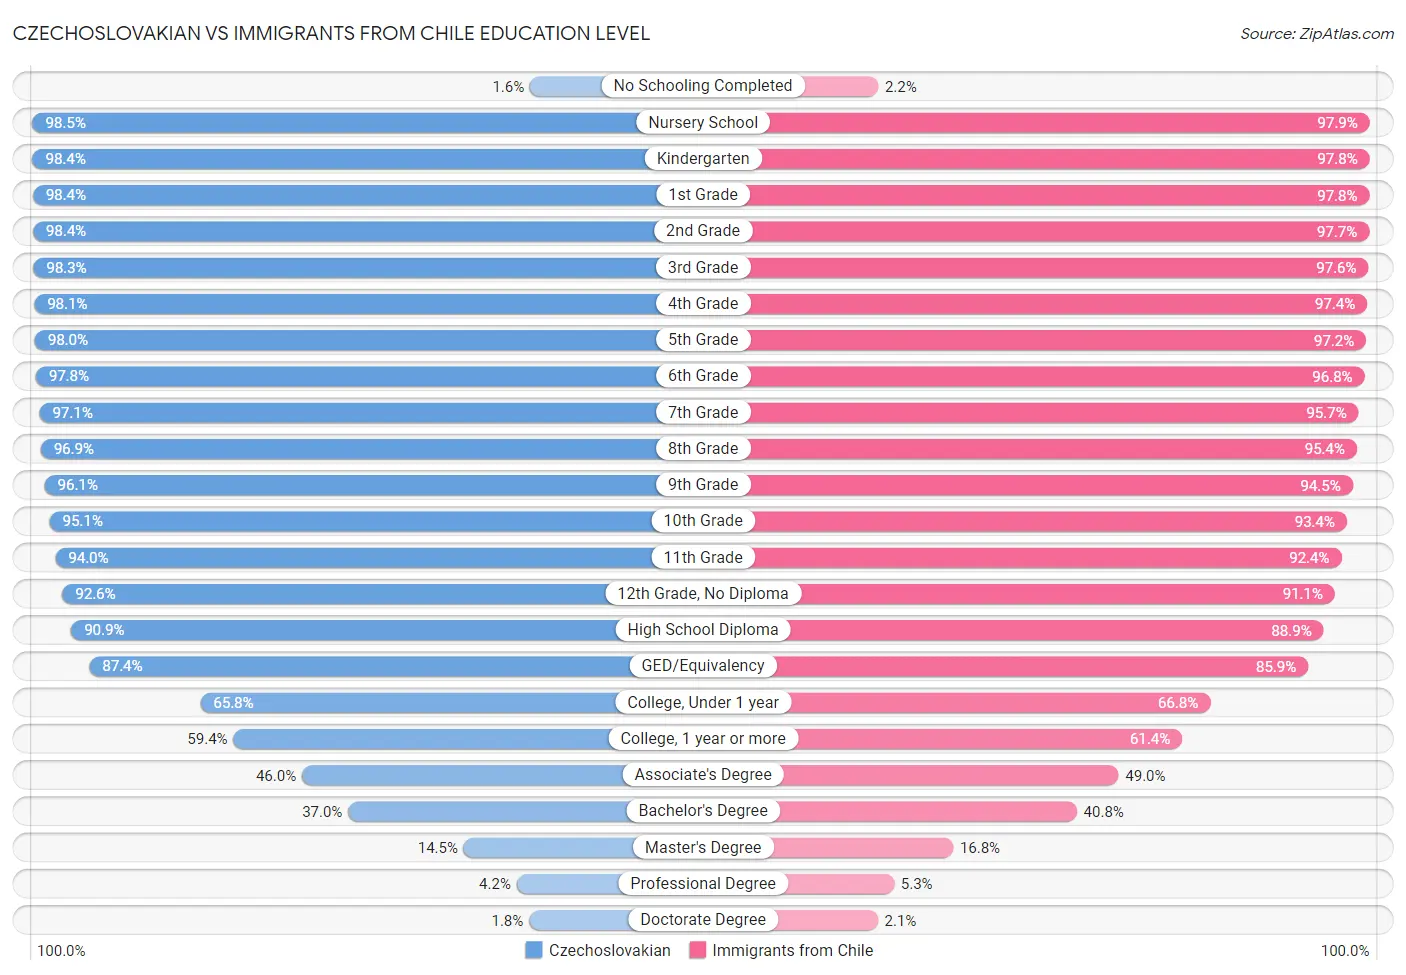 Czechoslovakian vs Immigrants from Chile Education Level